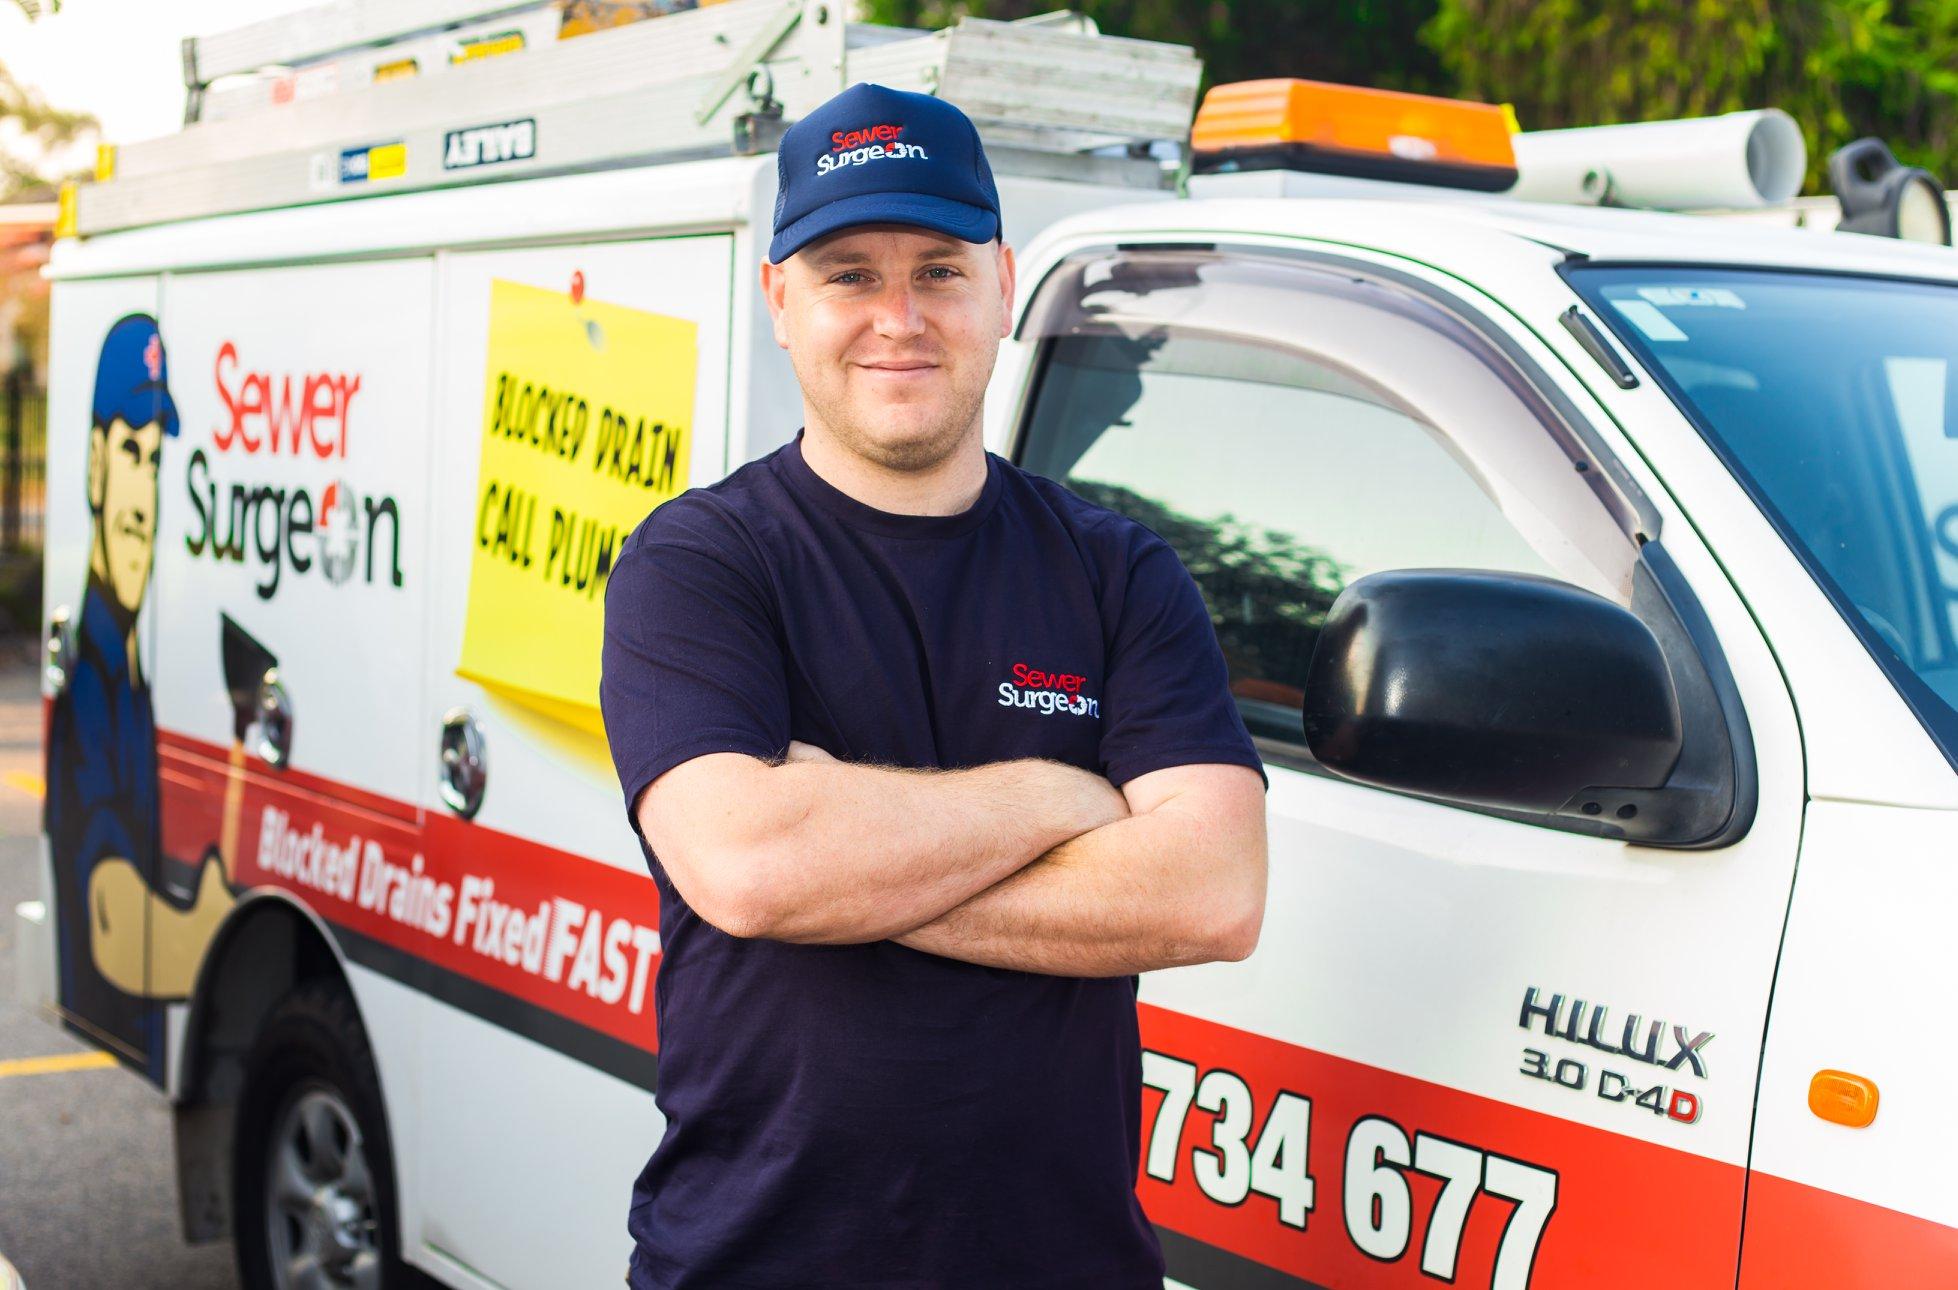 Burst Pipe Repair In Balmain, NSW: 24/7 Plumbing Call-Out Service For Relining